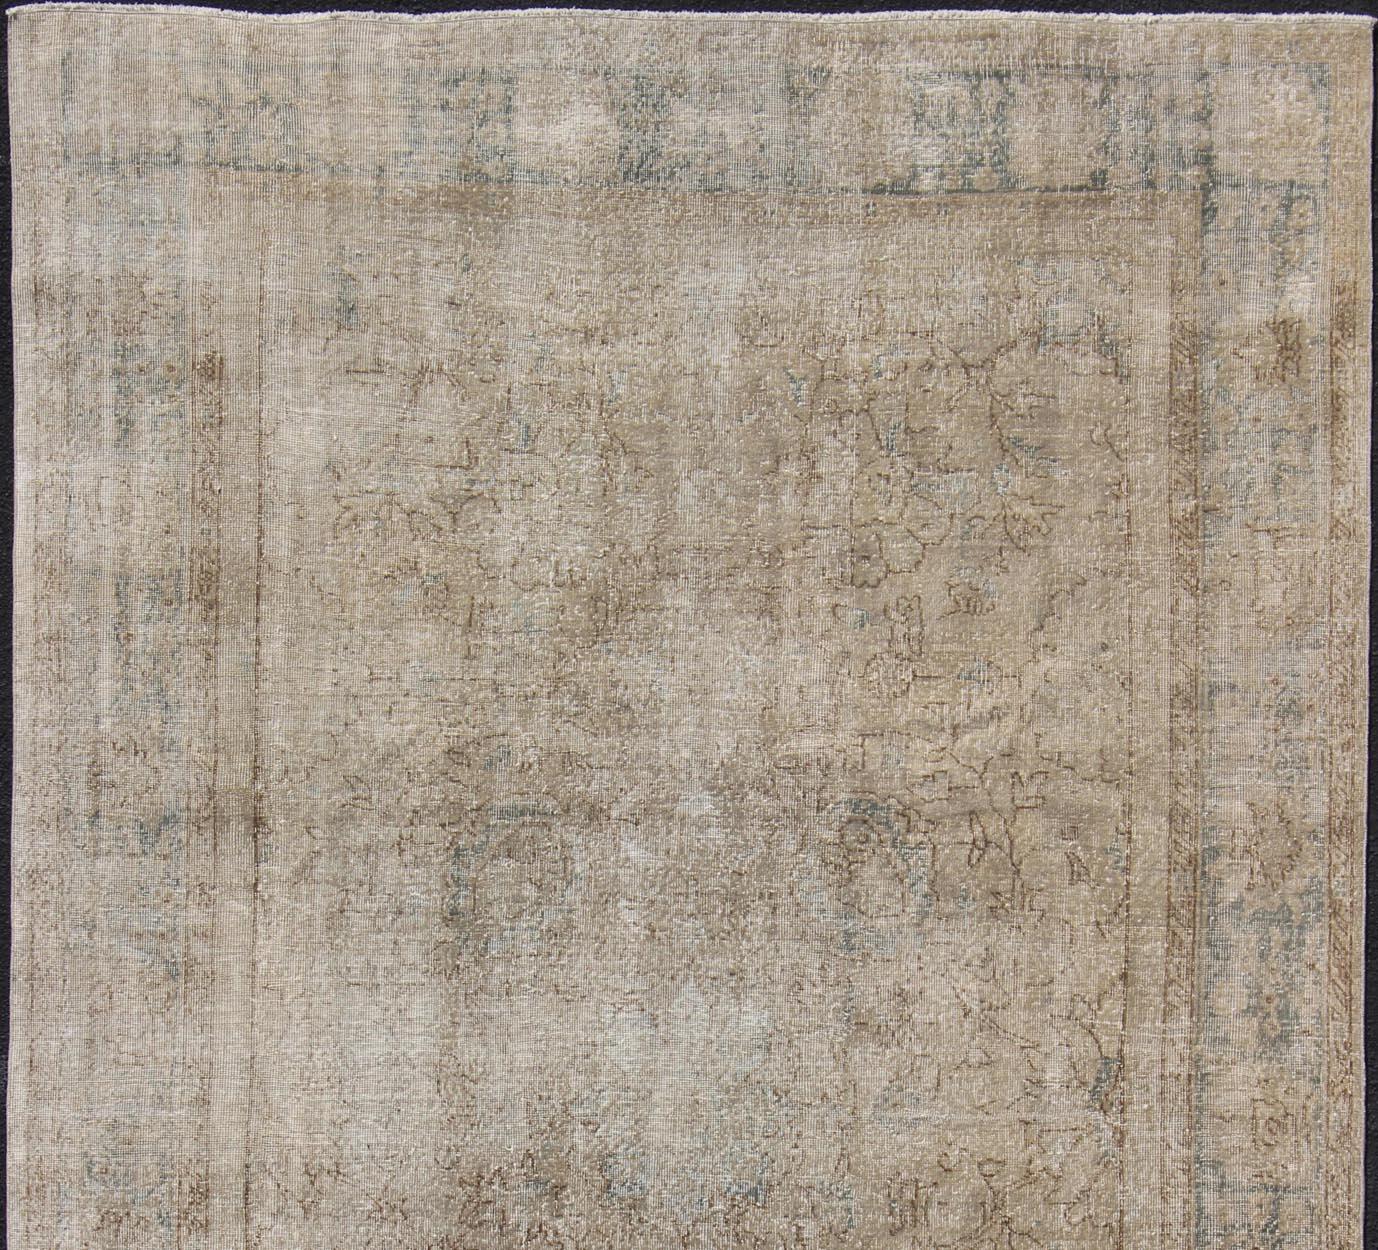 Hand-Knotted Distressed Turkish Carpet with Floral Design in Taupe, Gray, Brown and Cream